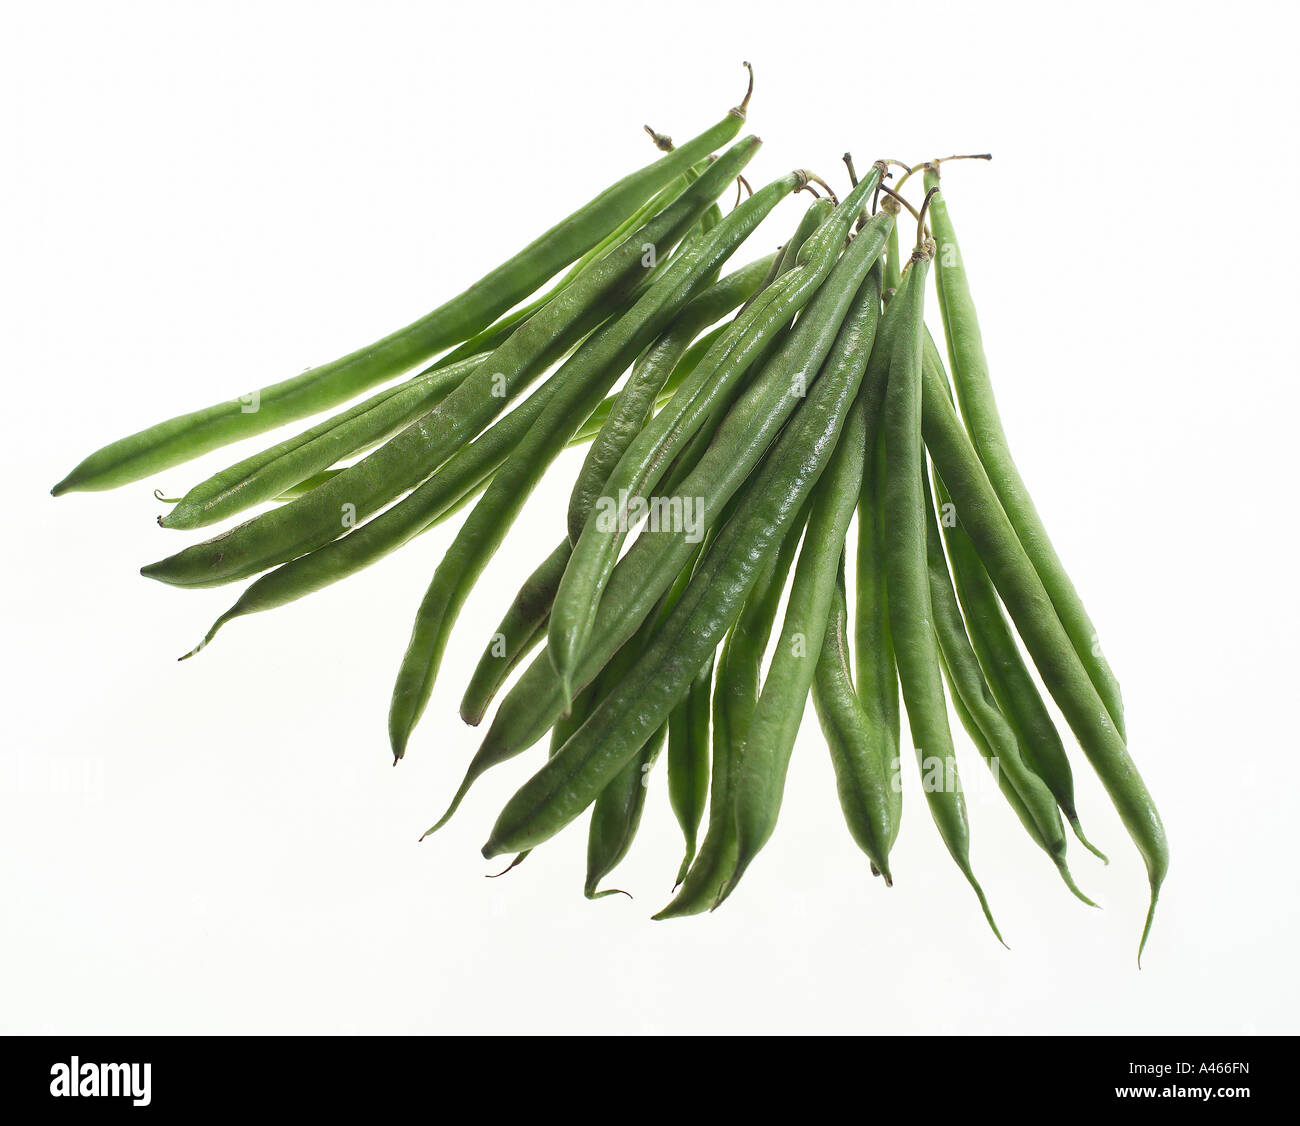 Beans on a white background Stock Photo